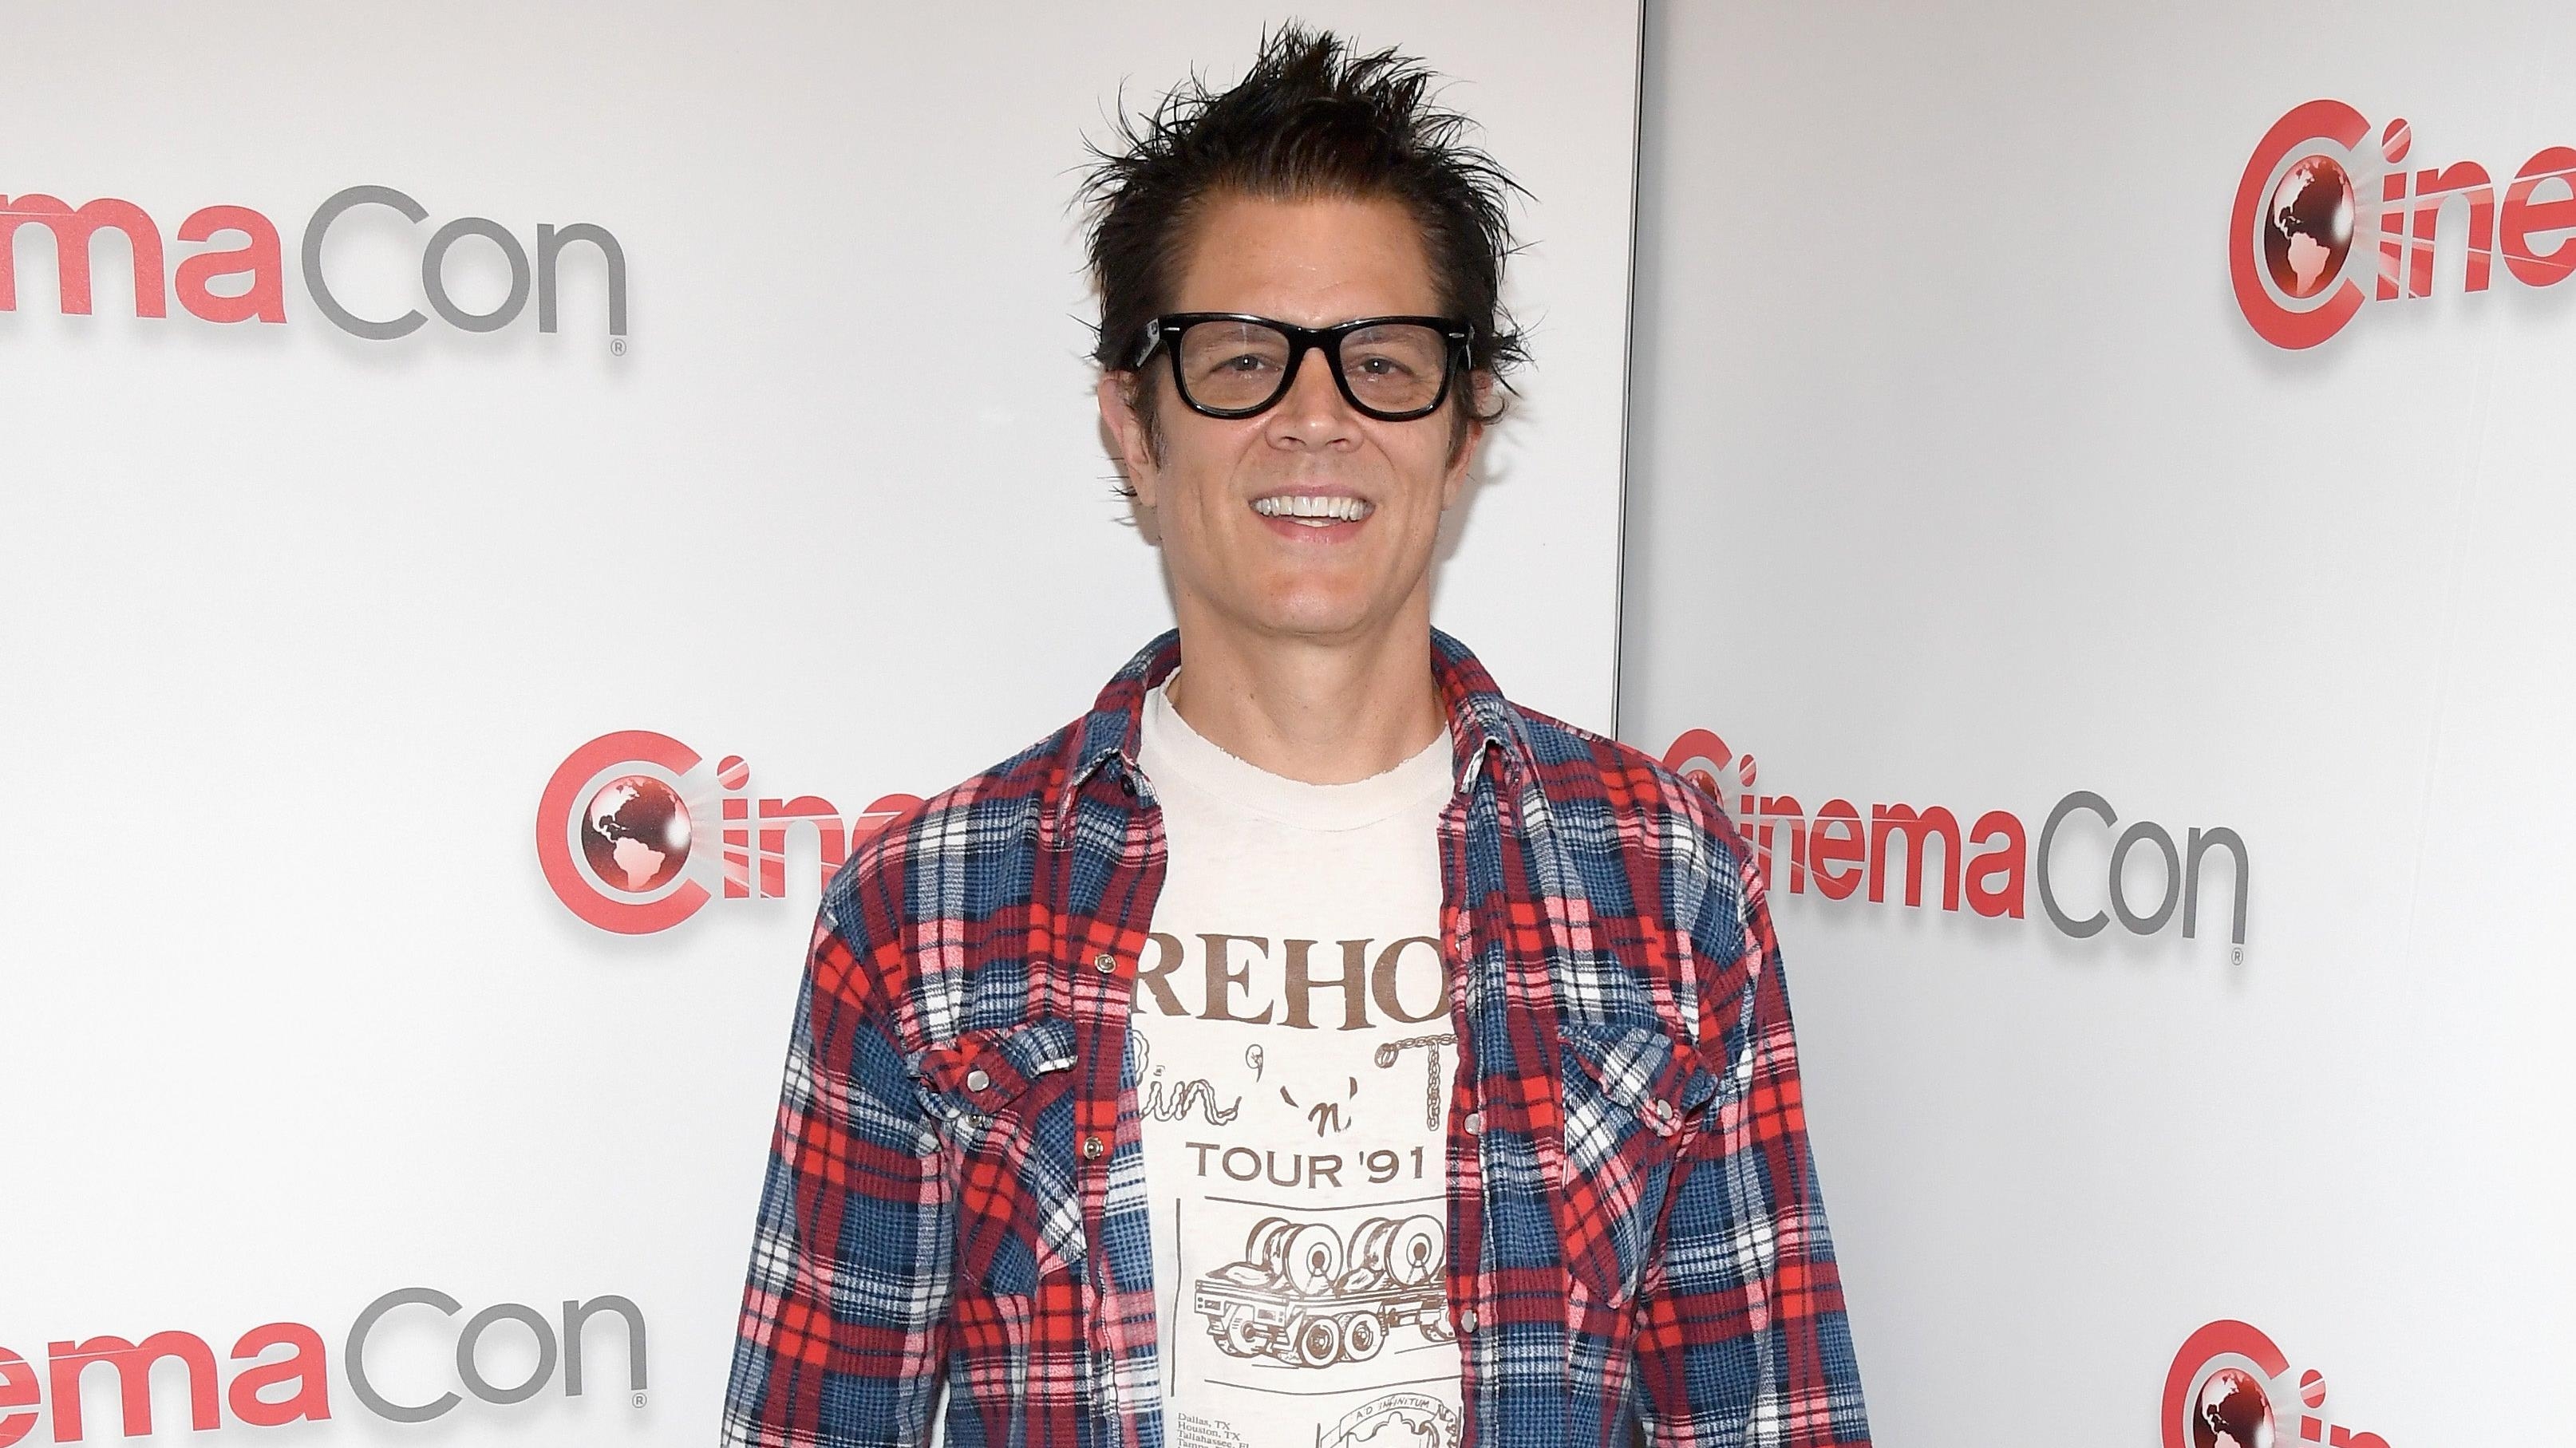 Johnny Knoxville explains why he turned down Lorne Michaels’ offer for him to join SNL